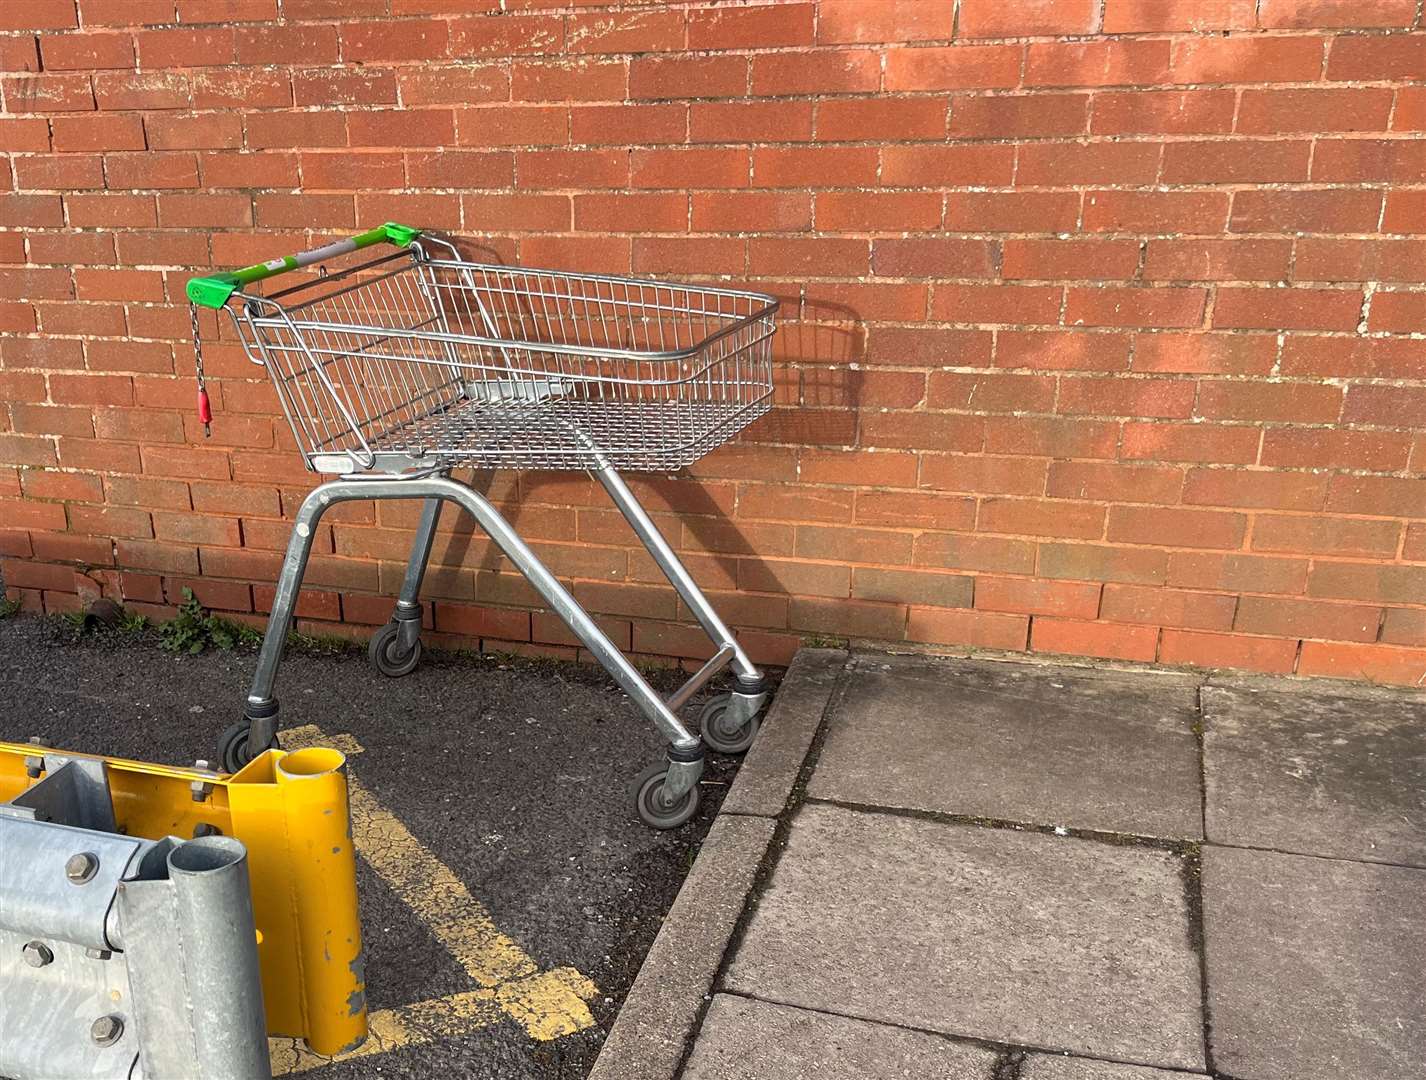 Swanley Town Council has received many complaints over the years about trollies being flytipped around the town